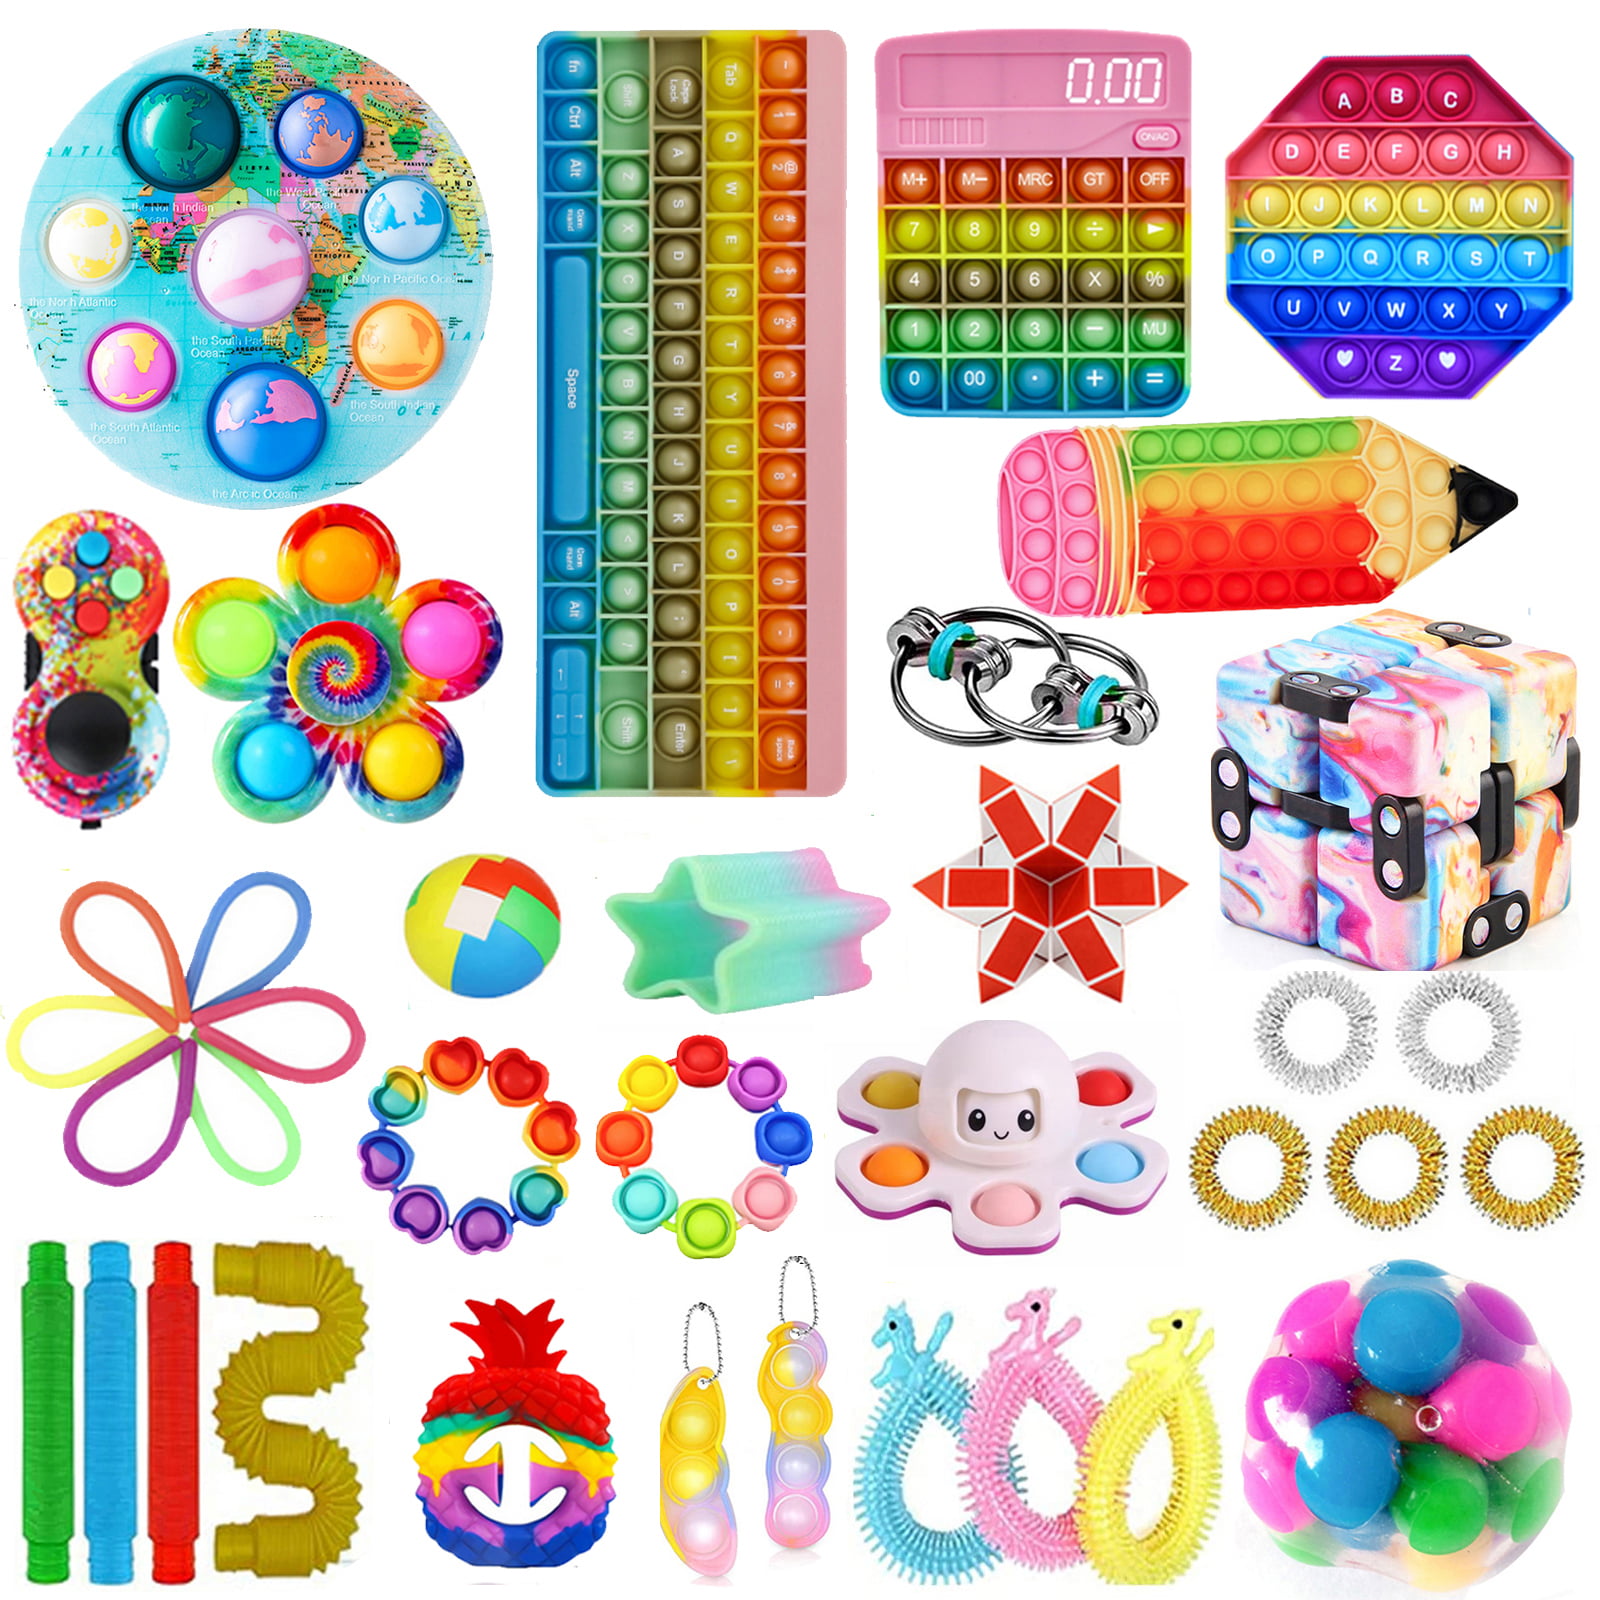 Sensory toys pack for Stress Relief and Anti-Anxiety , 25 Pack Details about   Fidget Toys set 